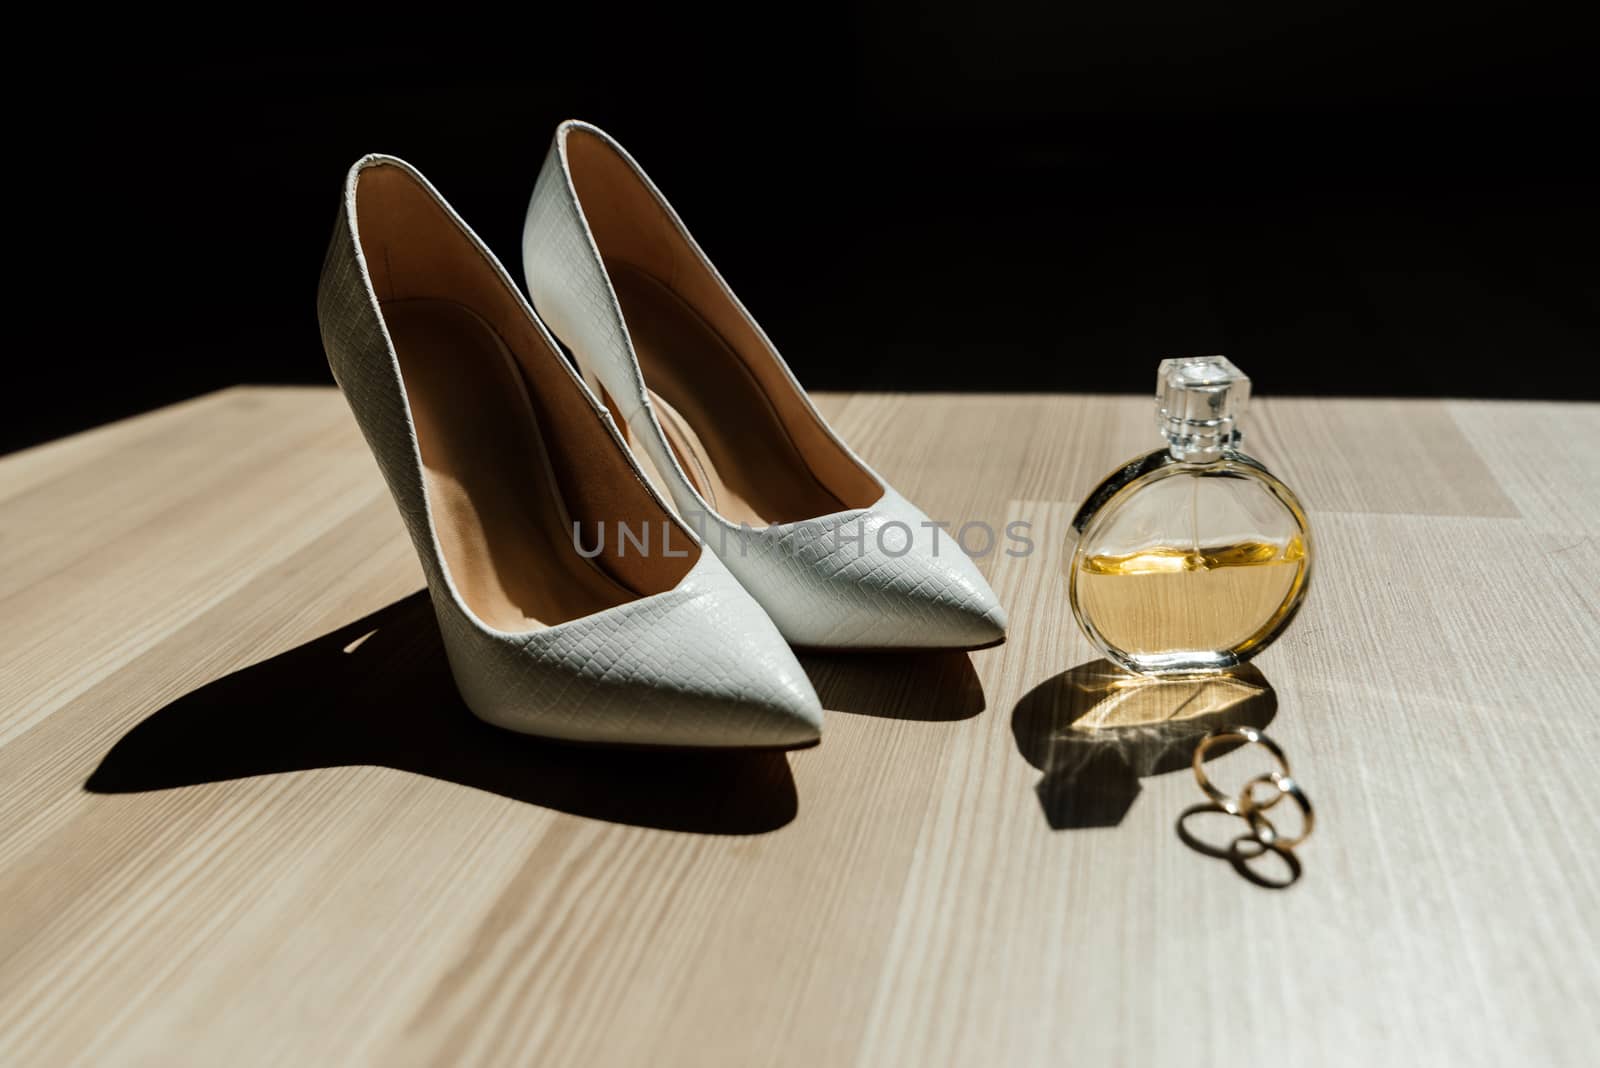 Bride's shoes, perfume and wedding rings are on the table by d_duda